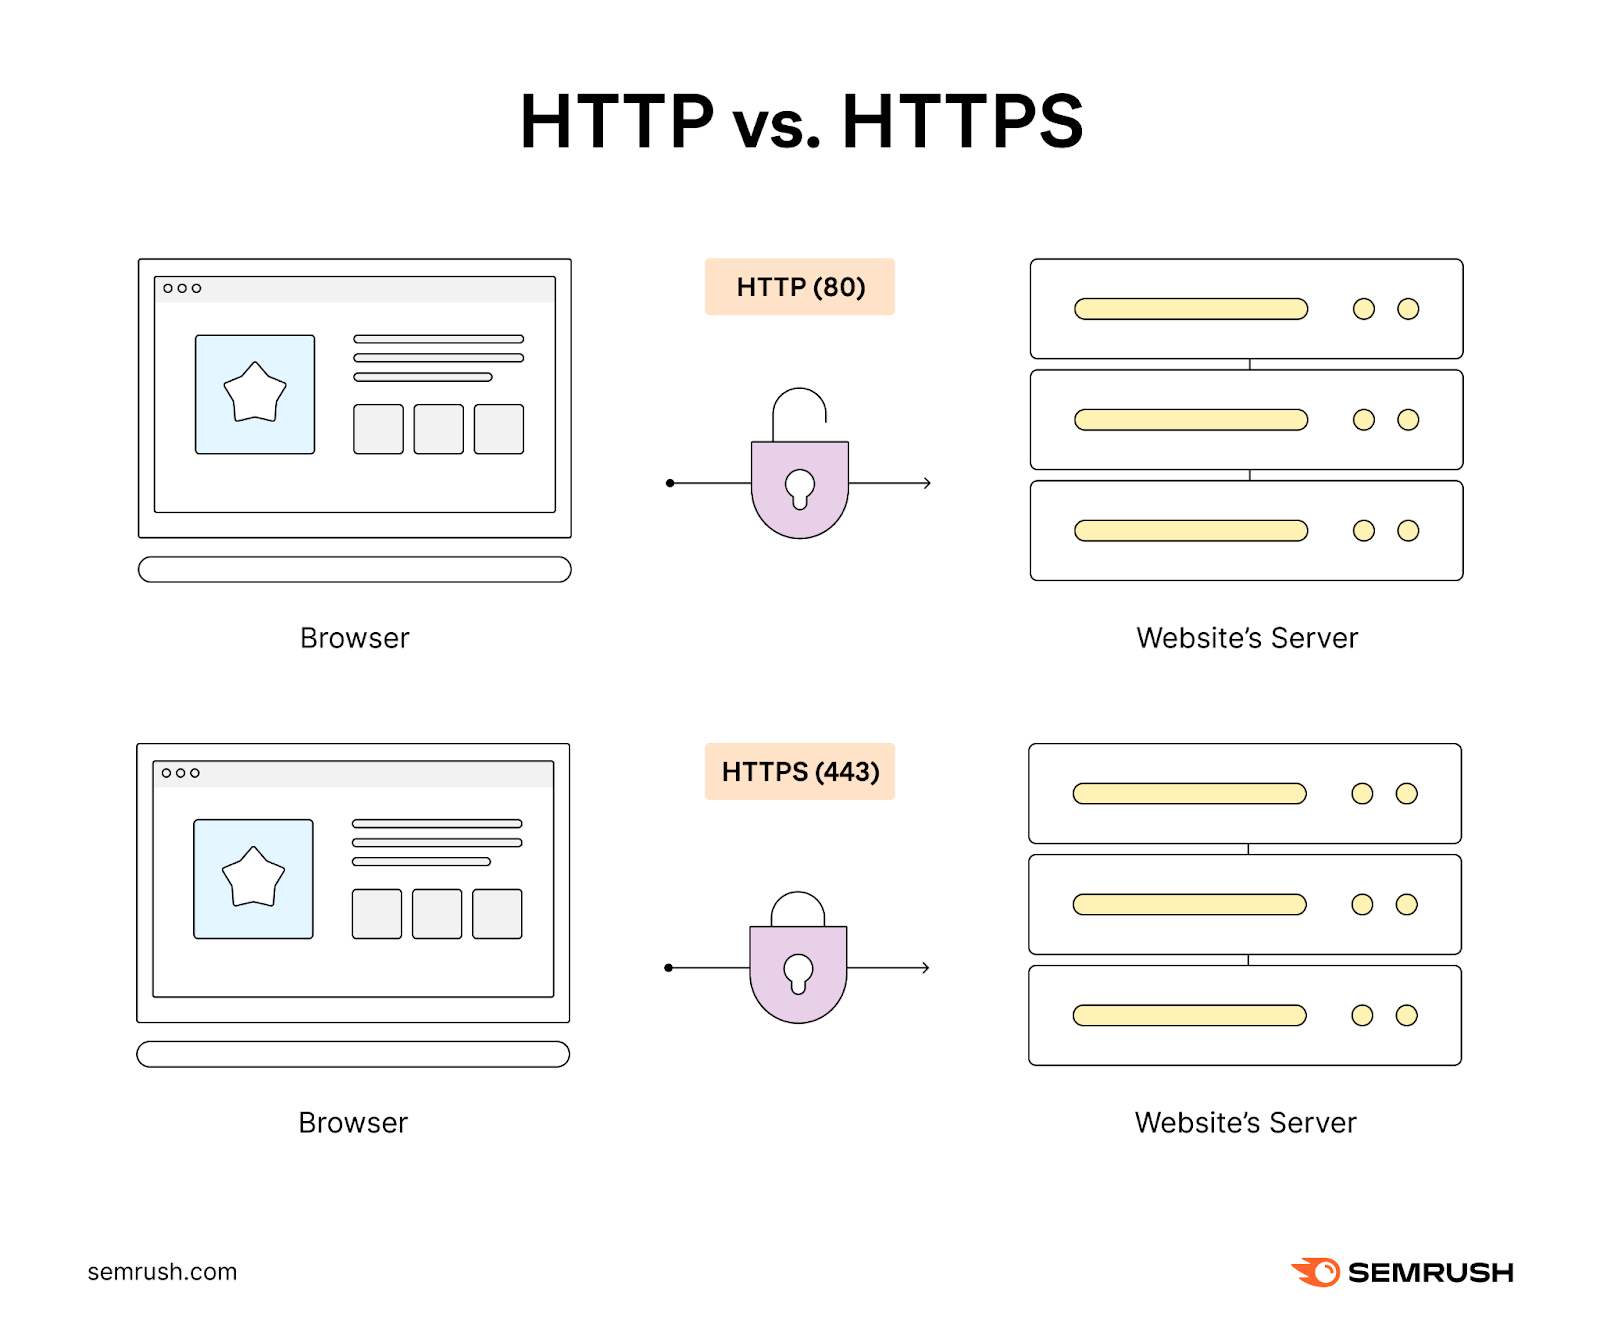 HTTP typically uses larboard  80, portion    HTTPS uses larboard  443